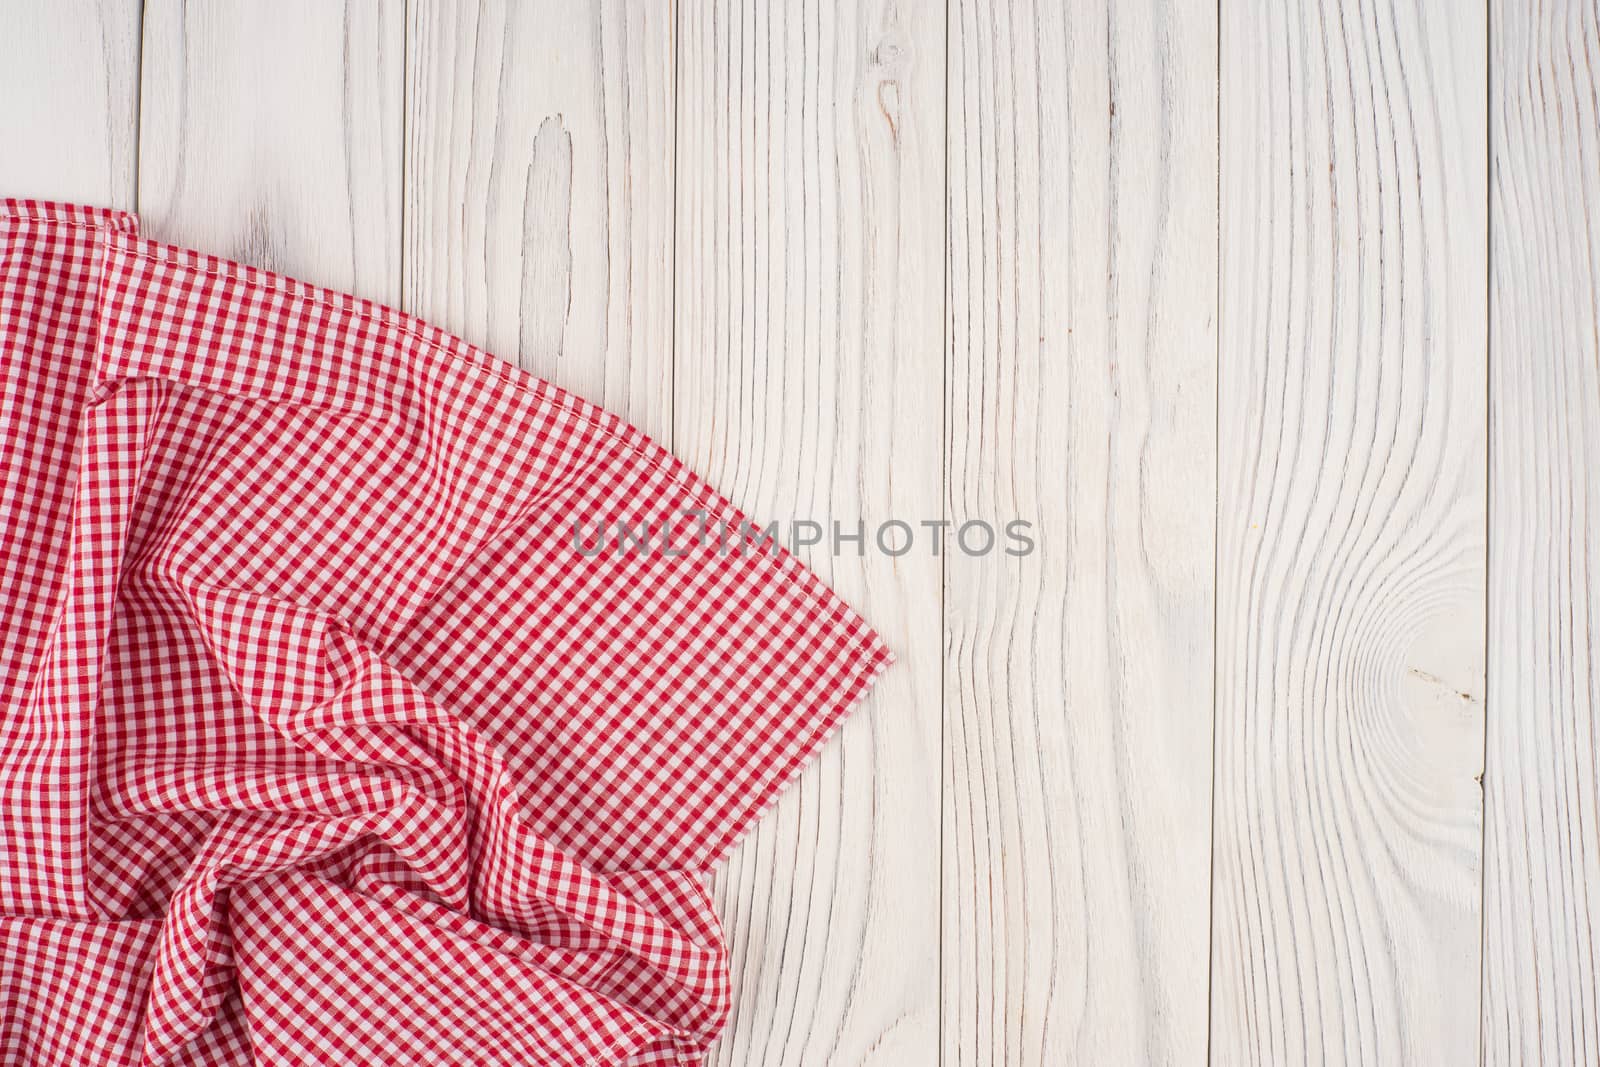 Red folded tablecloth over bleached wooden table. Top view.